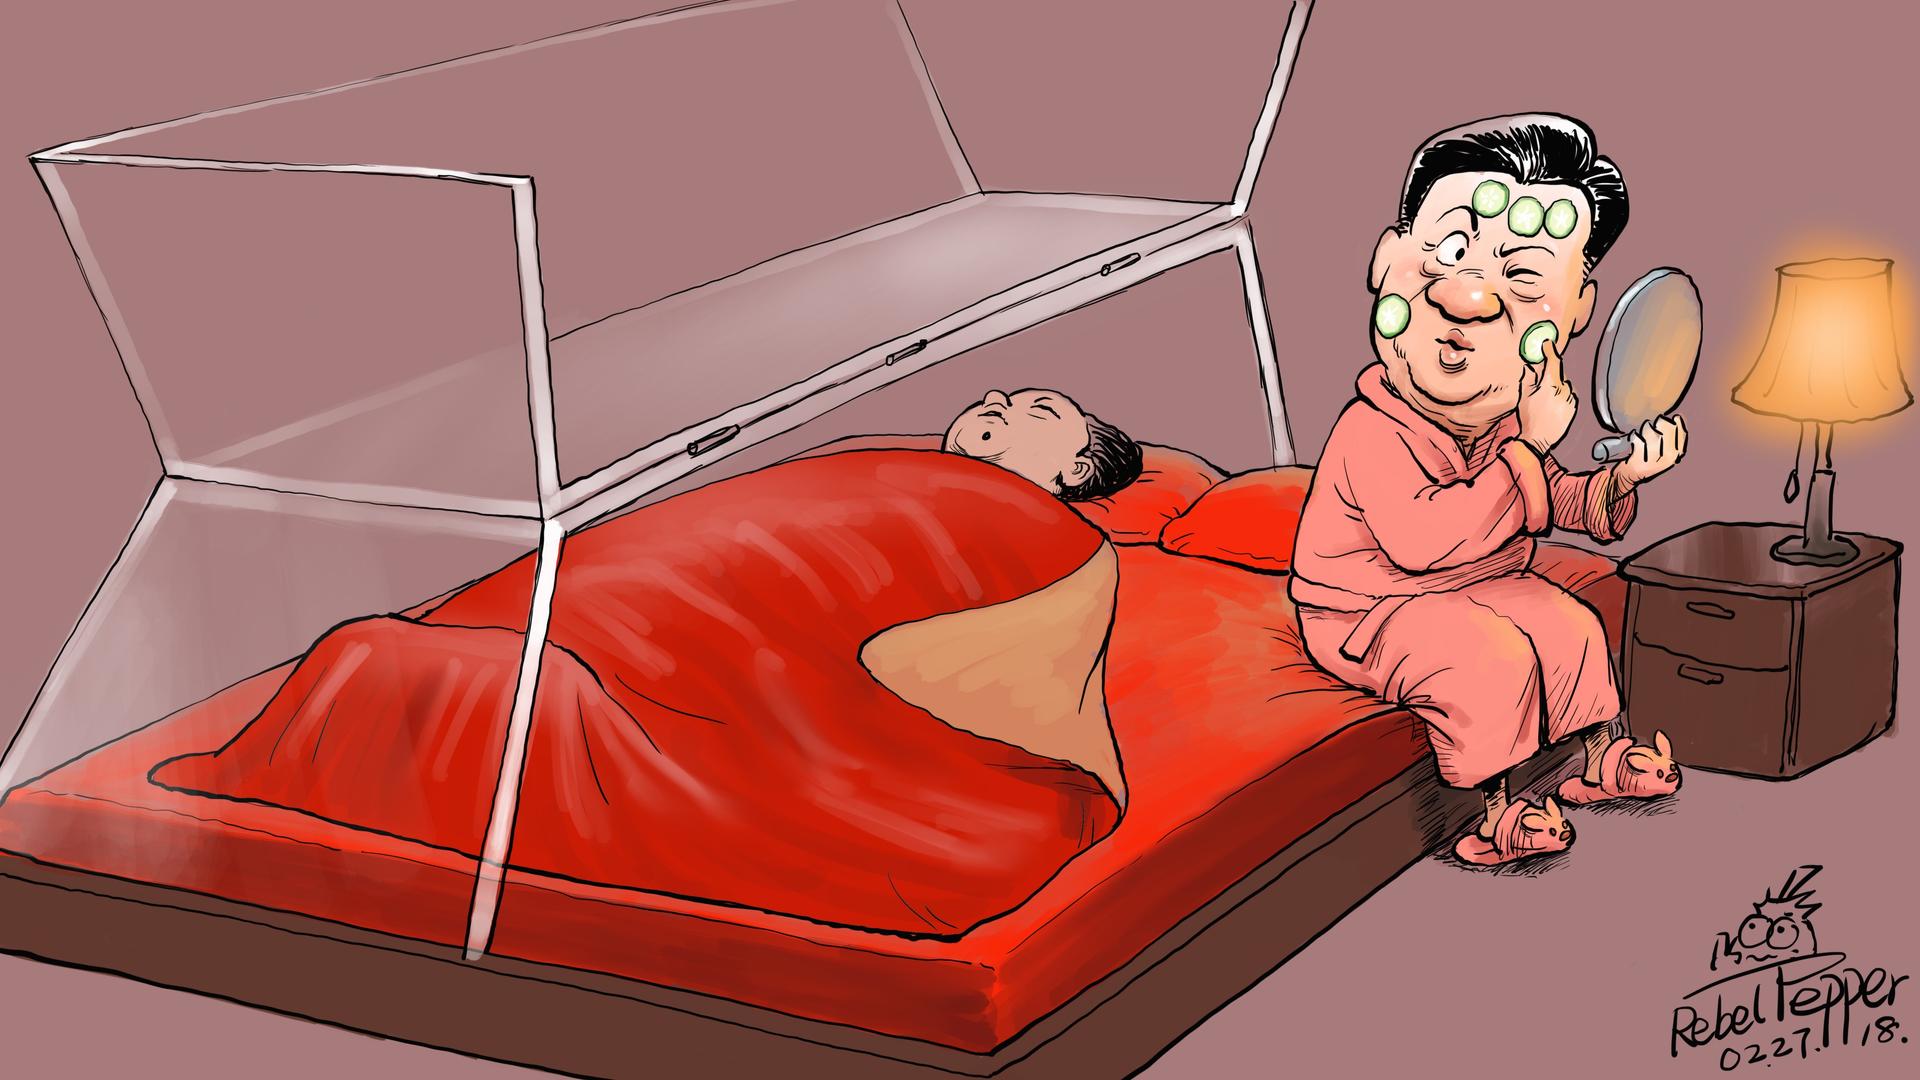 In this cartoon, Xi Jinping of China, sits on the side of a bed, ready to lay down next to a sleeping Mao Zedong. 